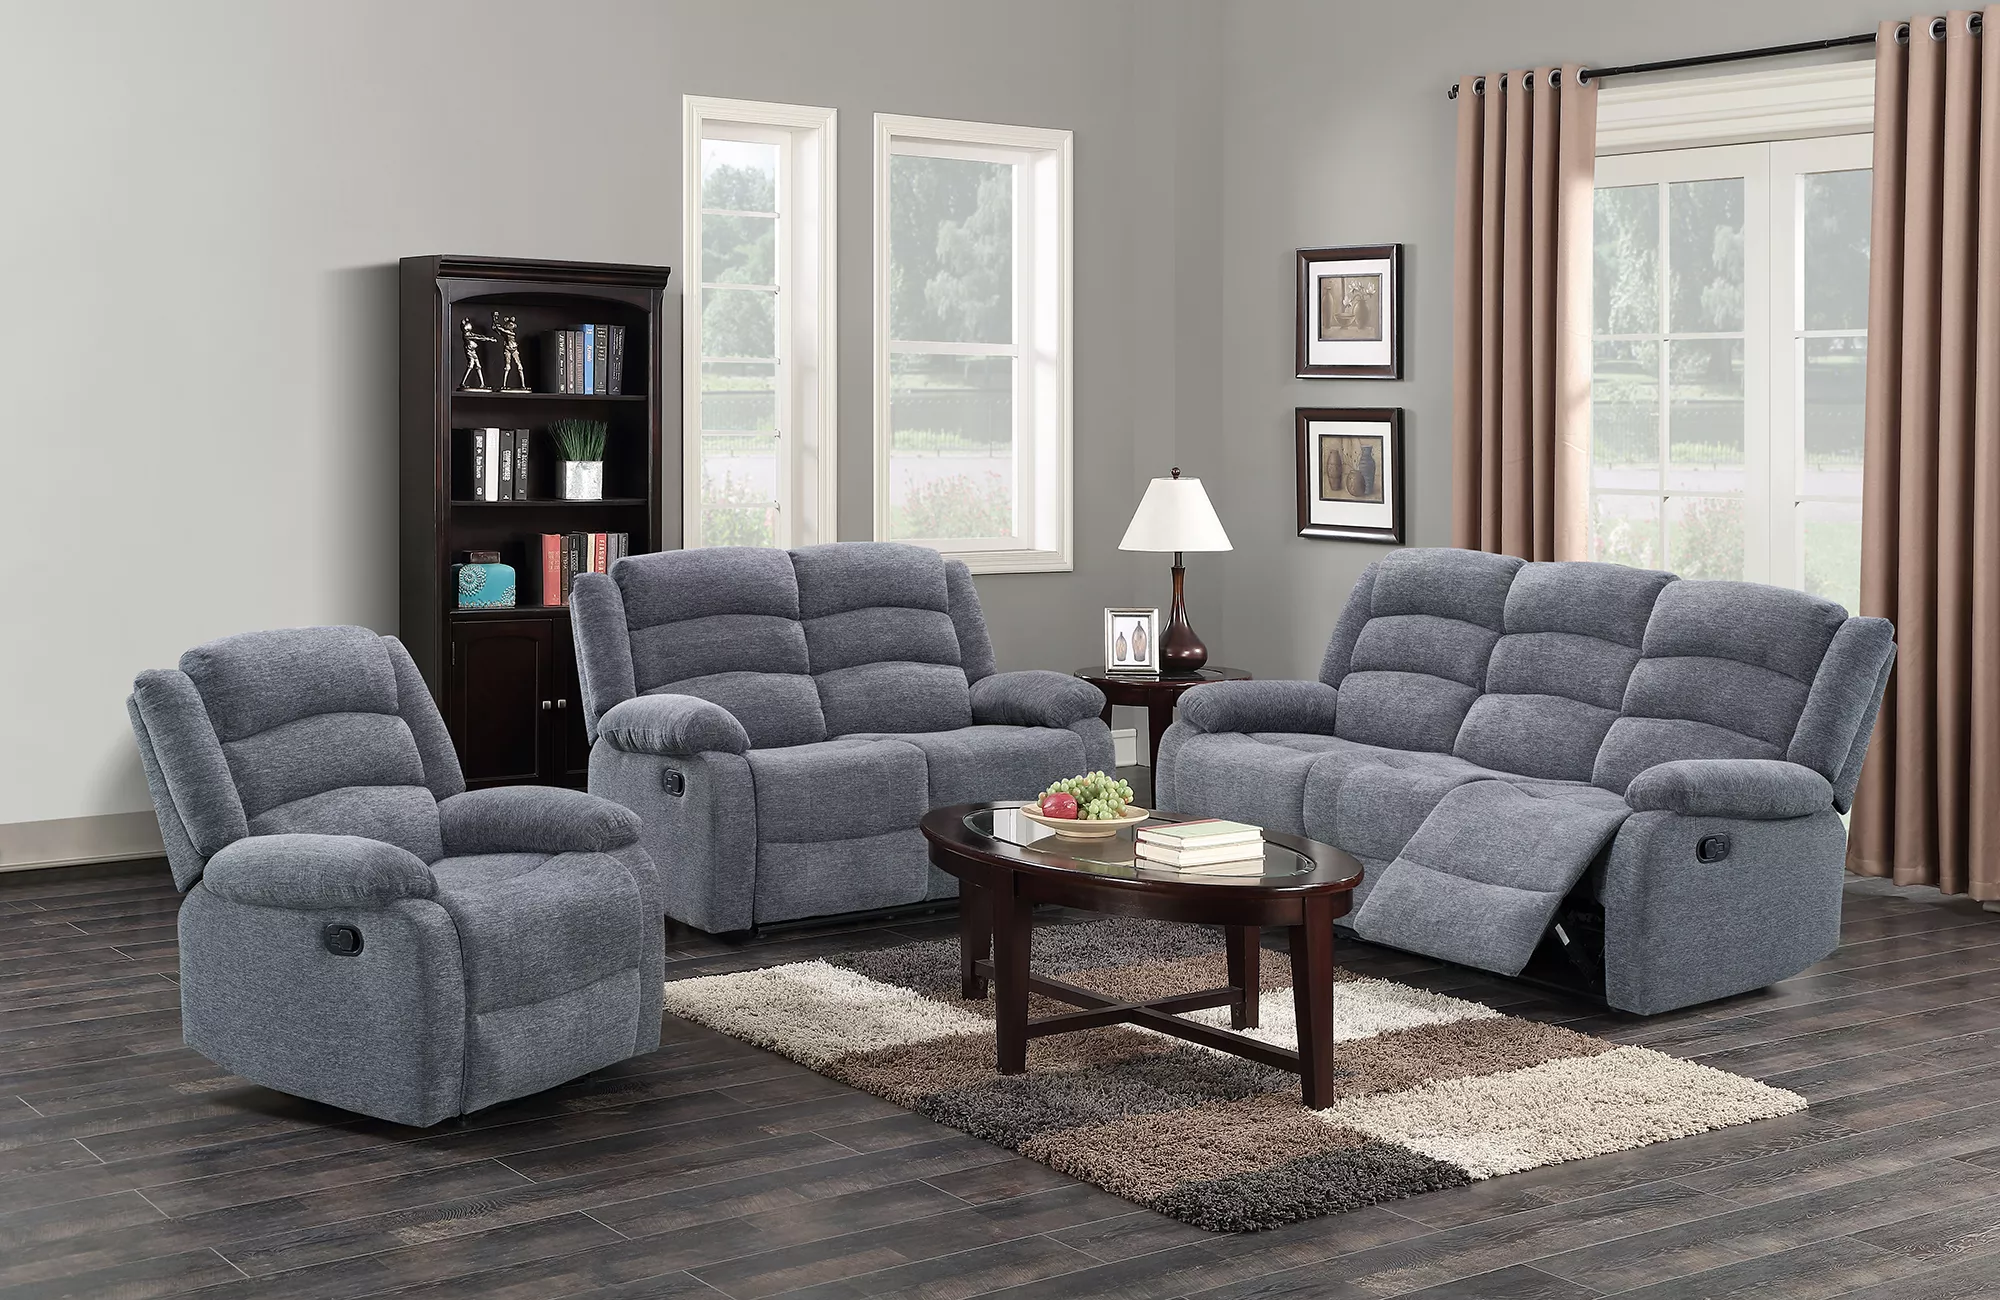 Recliner Sofas by Pepperfry: All you Need to Know